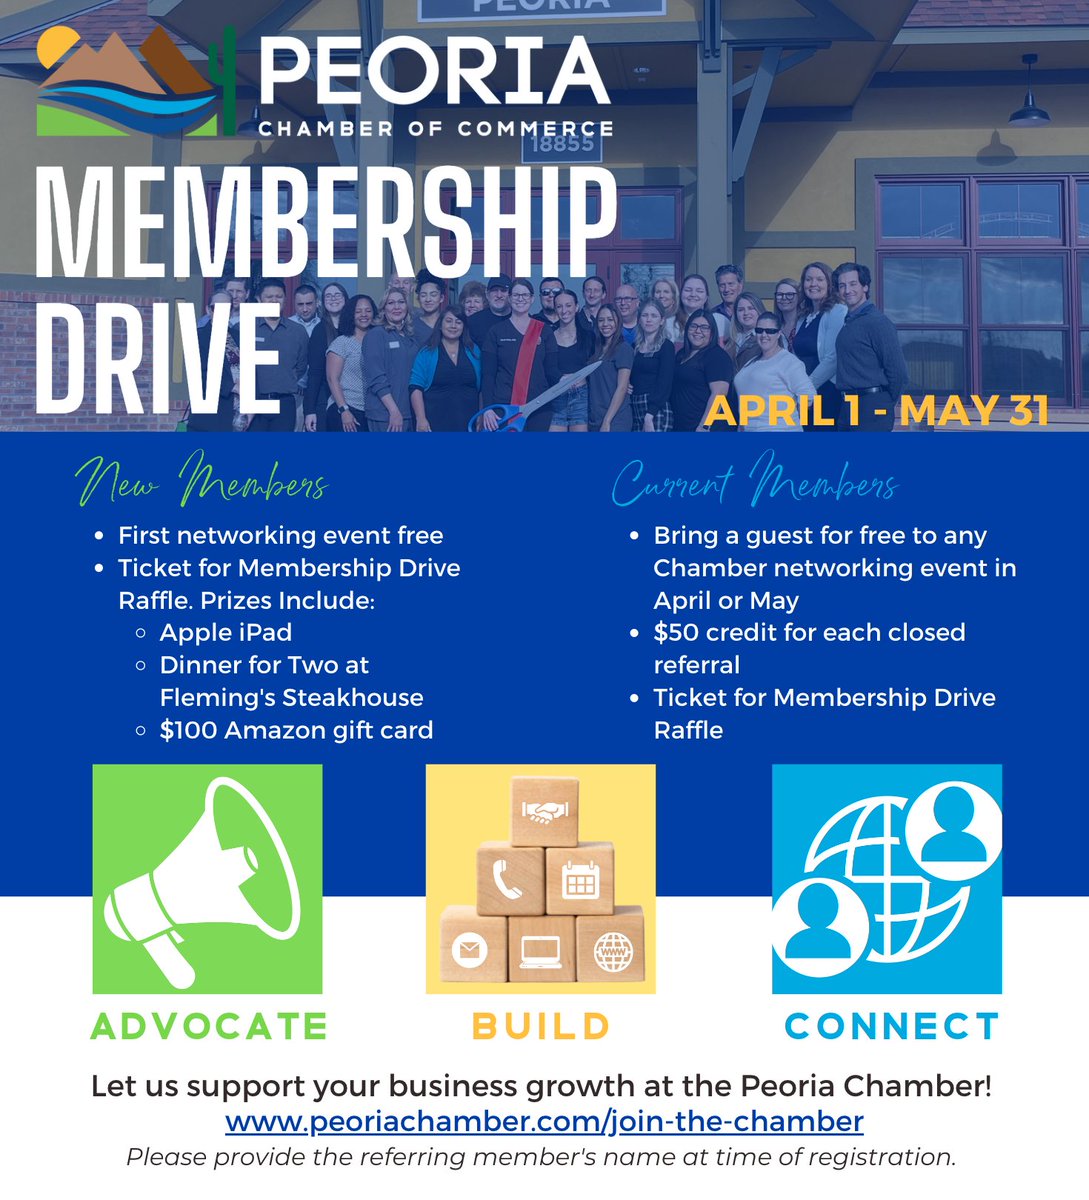 Announcing Peoria Chamber of Commerce's Membership Drive! Sign up from now until May 31st to get additional perks! Existing members- refer your friends and family to take advantage of this special limited time offer! #AdvocateBuildConnect